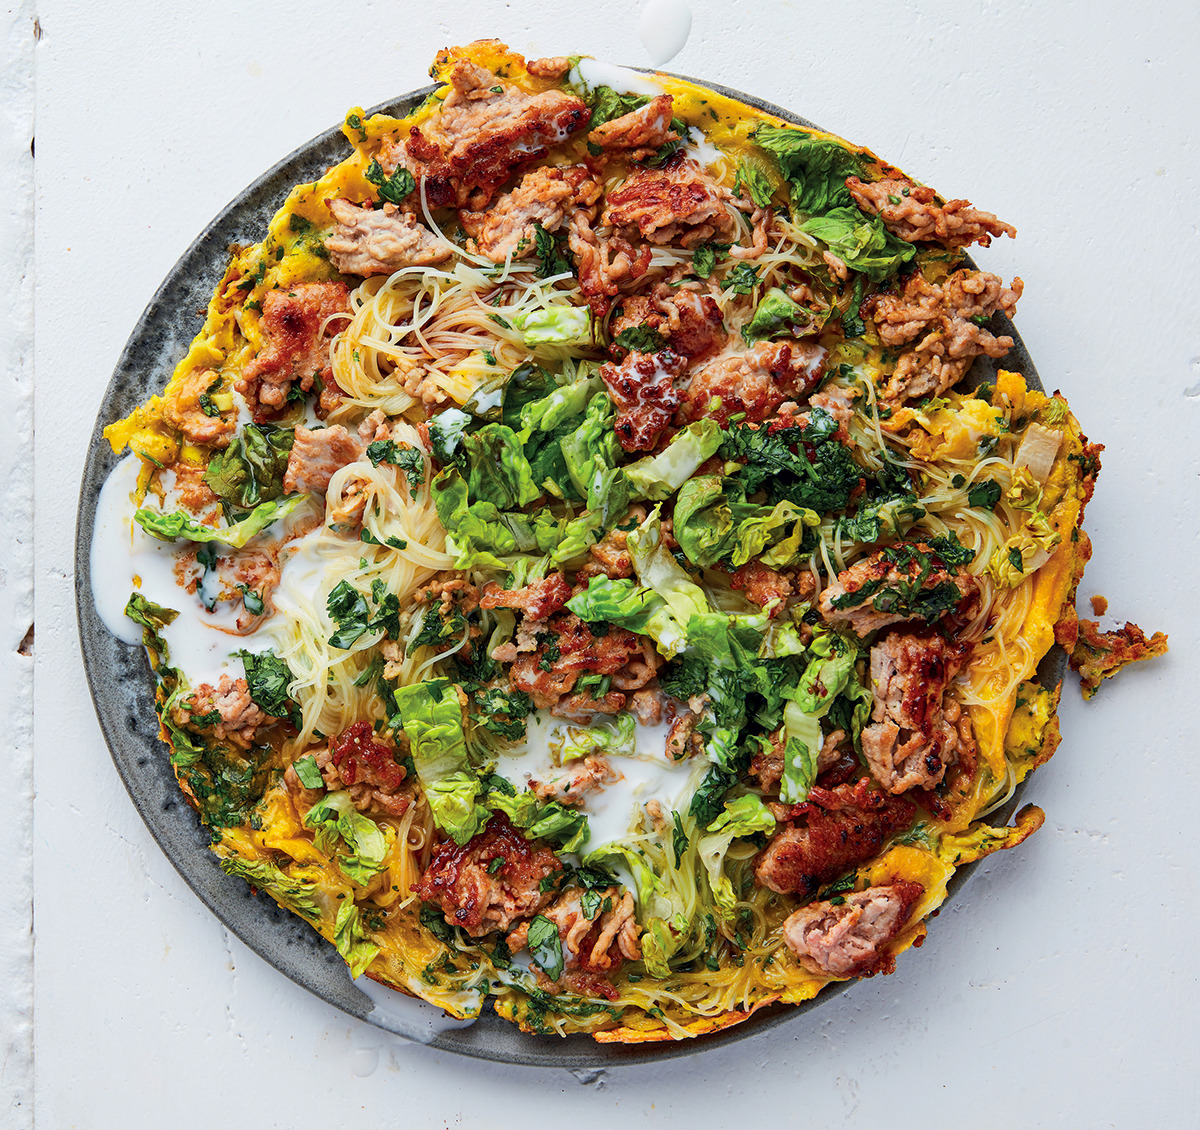 vietnamese-scrambled-eggs-with-pork-mince-lettuce-and-herbs